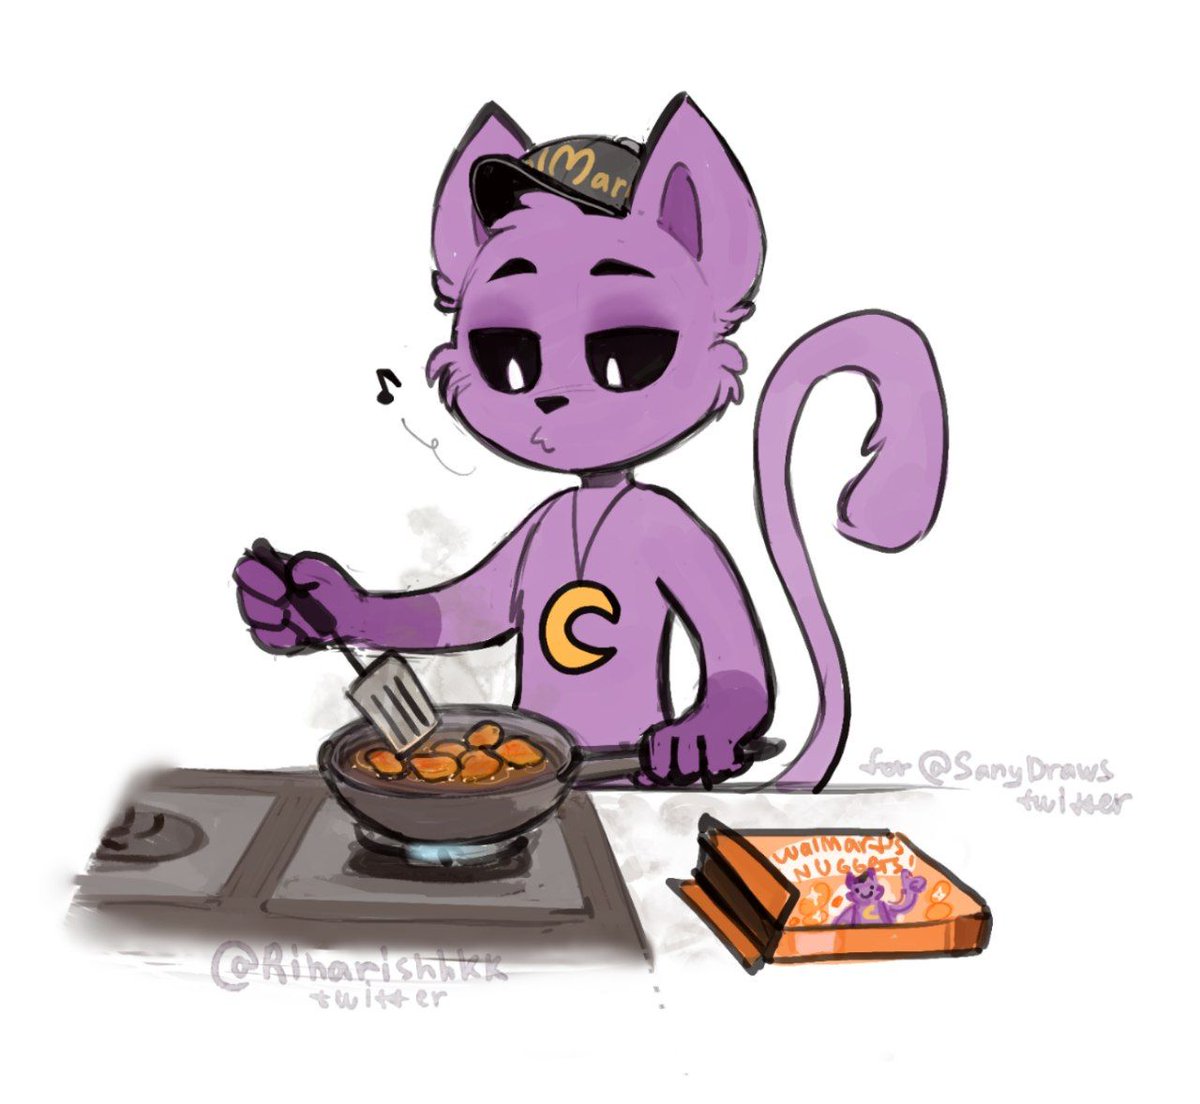 do you also draw how Sany cooks nuggets? I Yes.
@SanyDraws I'M SORRY, I COULDN'T HELP MYSELF..
I just saw some of your posts and everyone was talking about nuggets, so I thought..HEHHHEH 
#sanydraws #sanycooksnuggets #art #ppt #PoppyPlaytime3